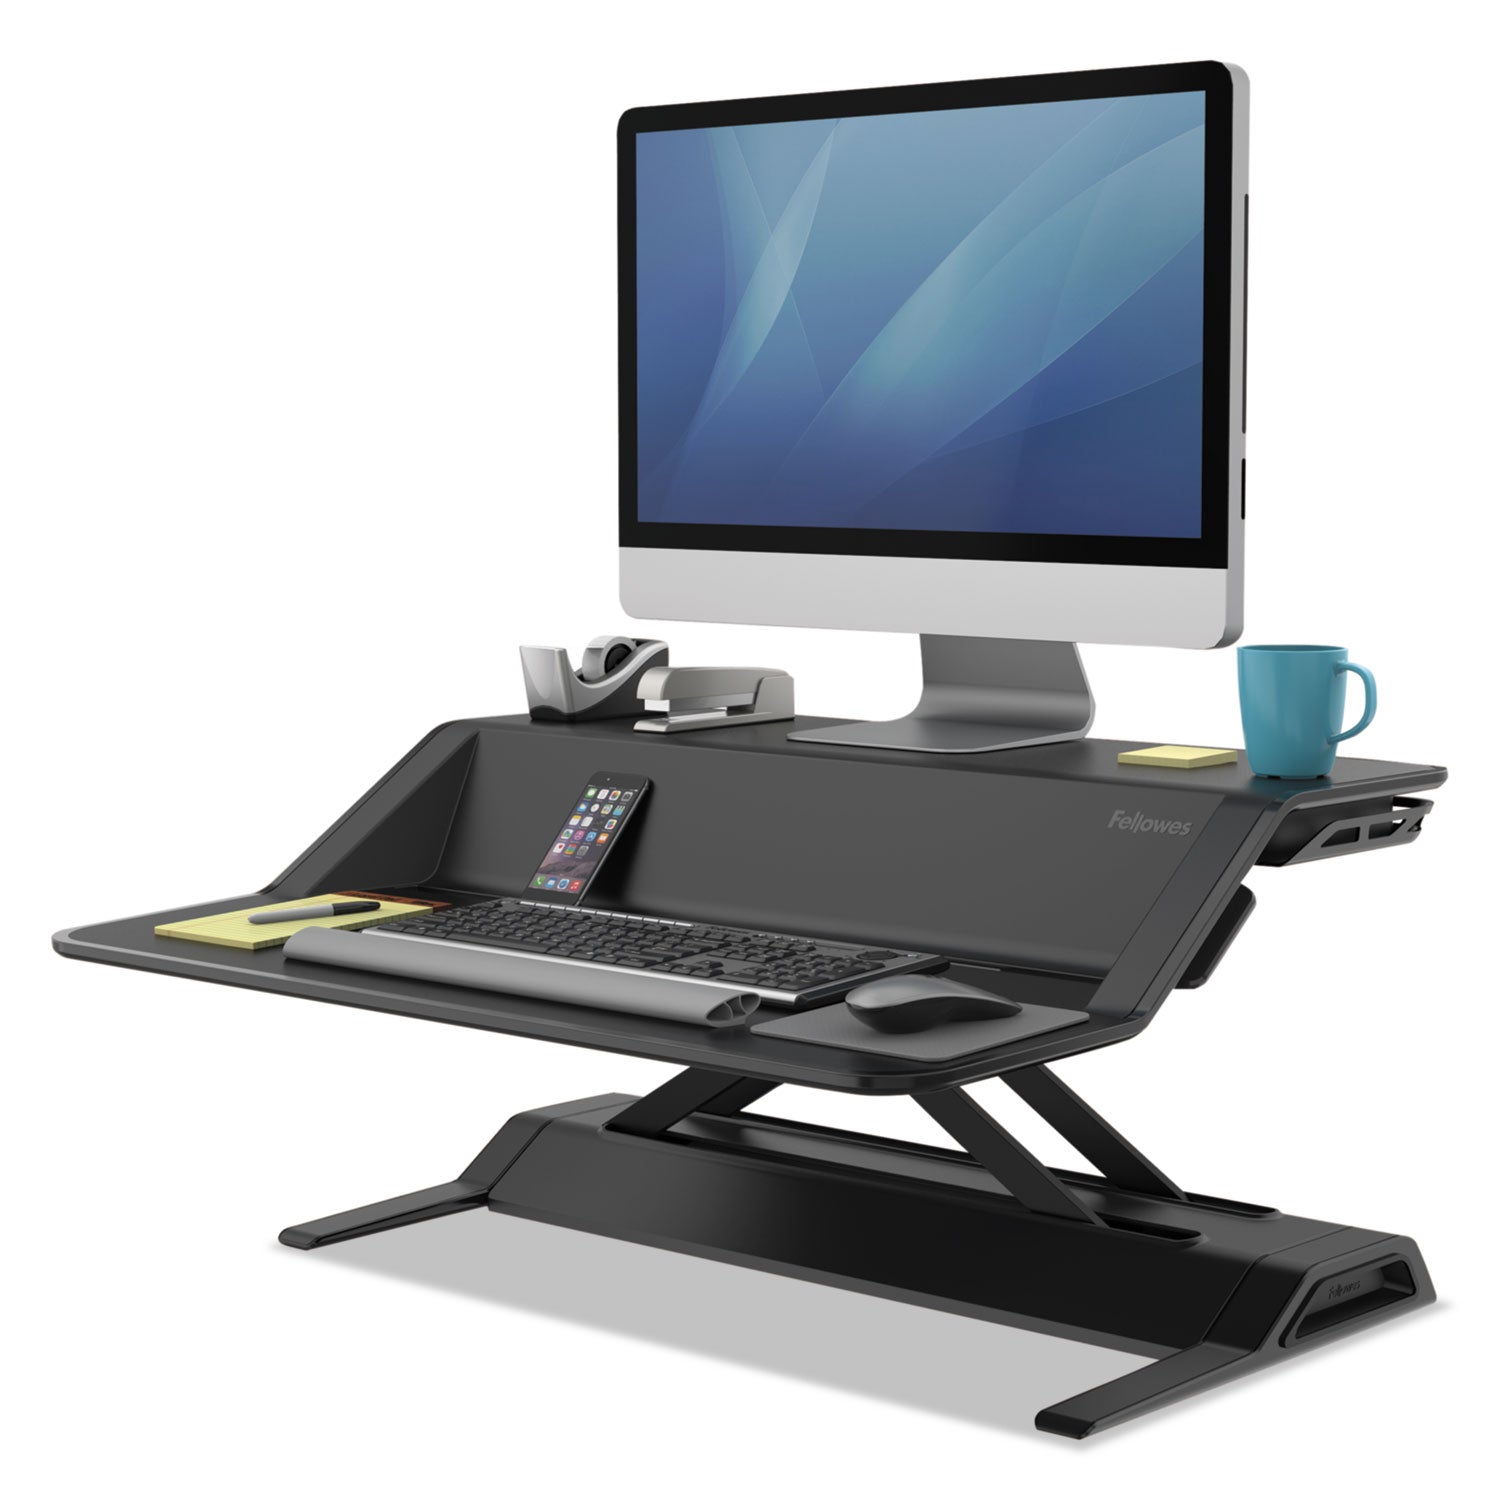 Lotus Sit-Stands Workstation, 32.75" x 24.25" x 5.5" to 22.5", Black - 2